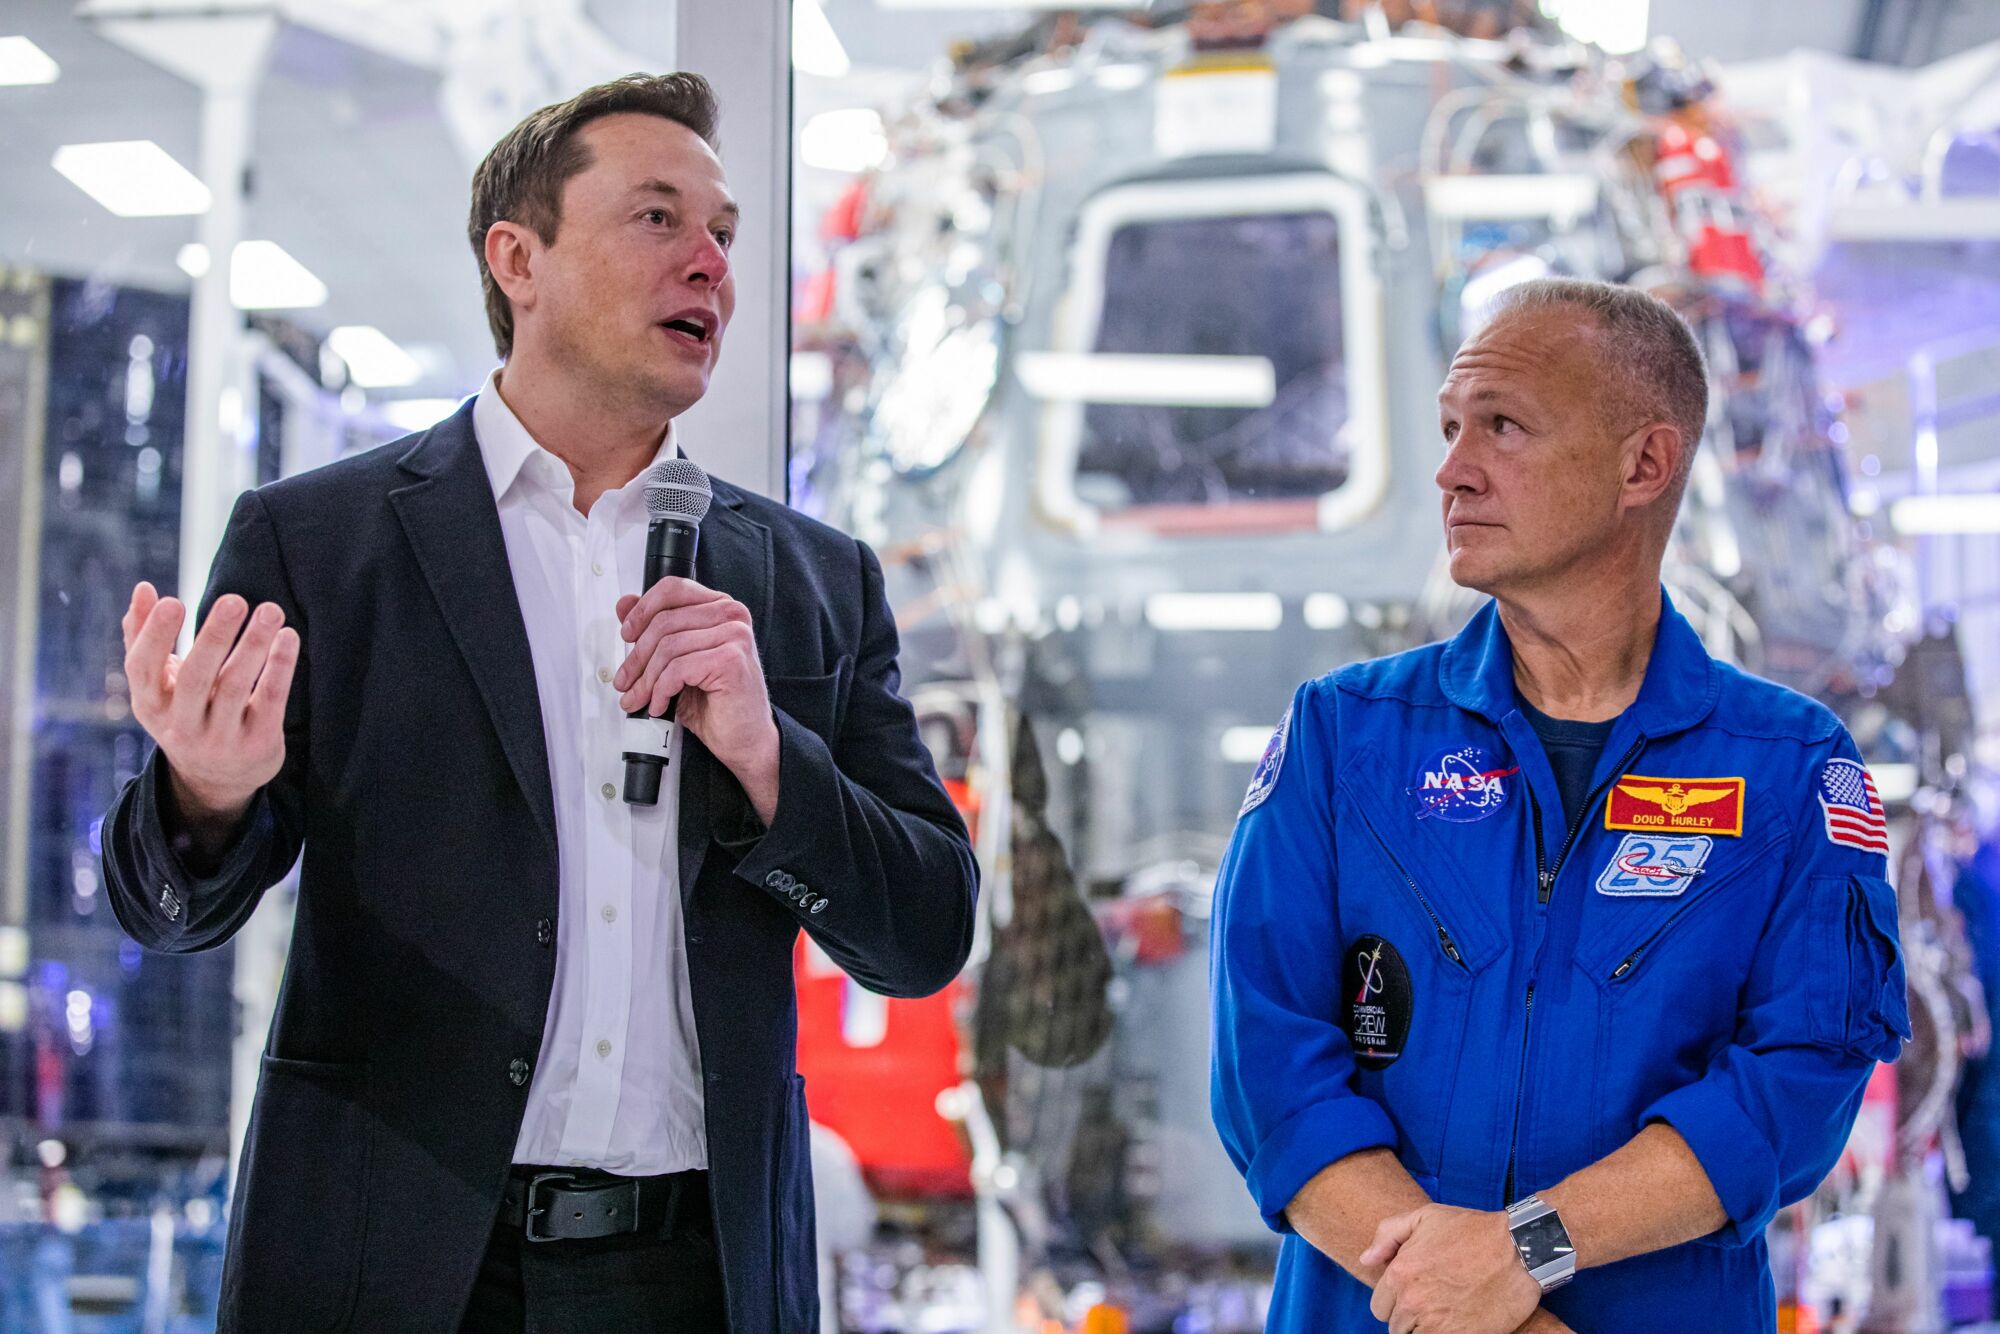 Elon Musk talking about SpaceX's Dragon crew capsule